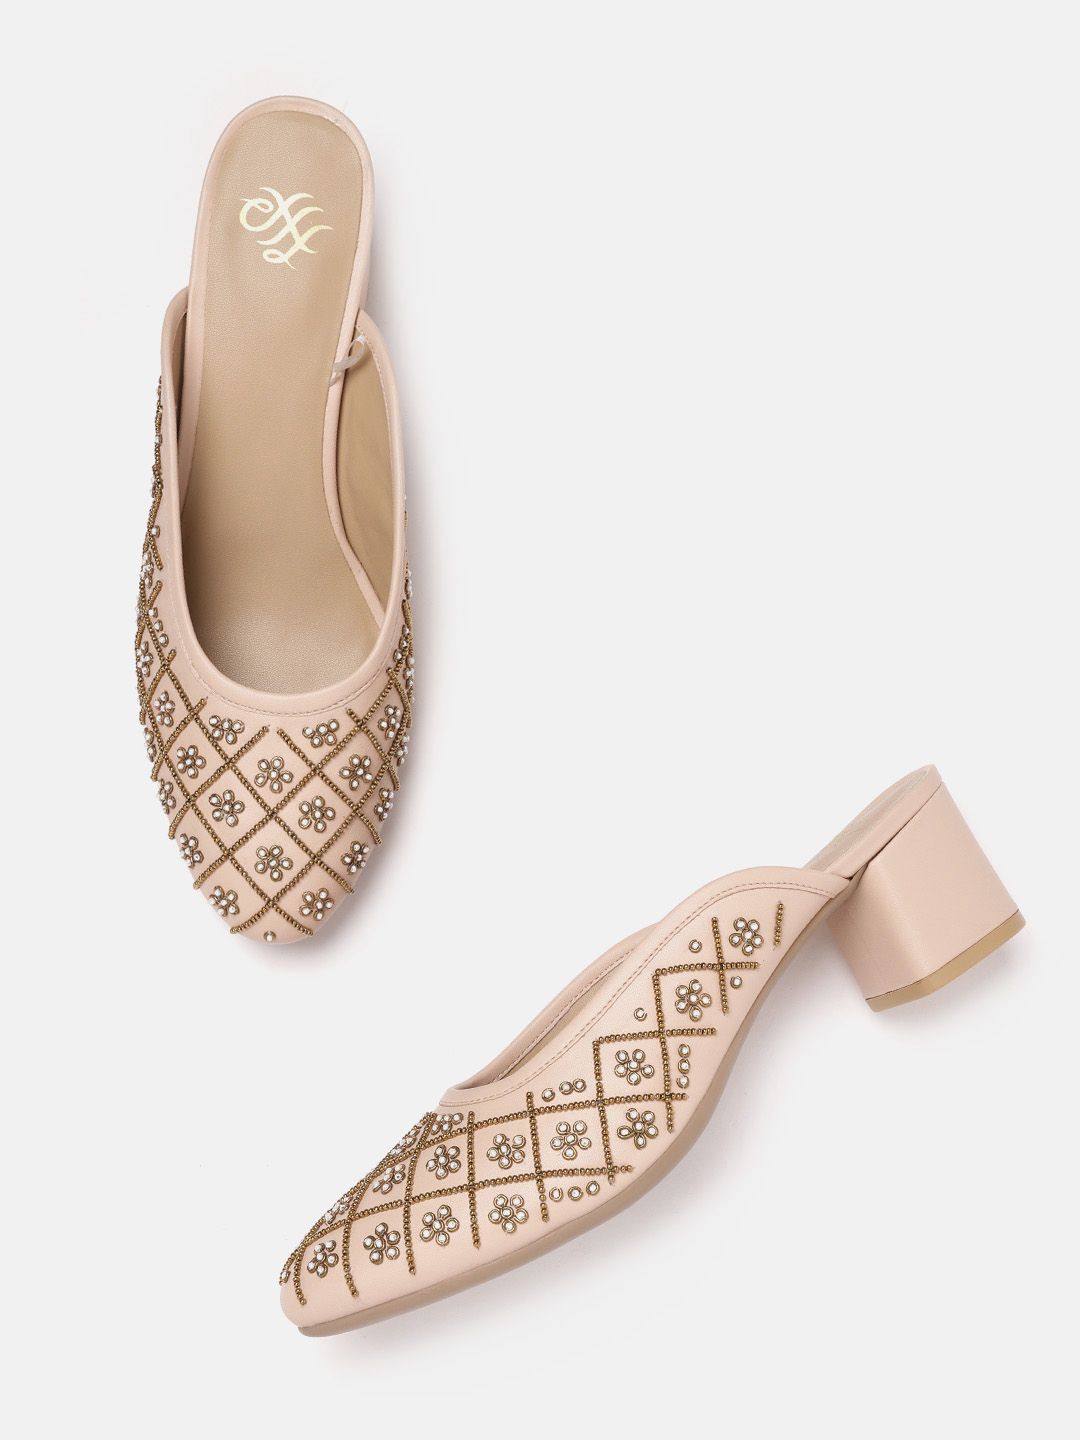 House of Pataudi Peach-Coloured & Gold-Toned Embellished Handcrafted Heeled Mules Price in India